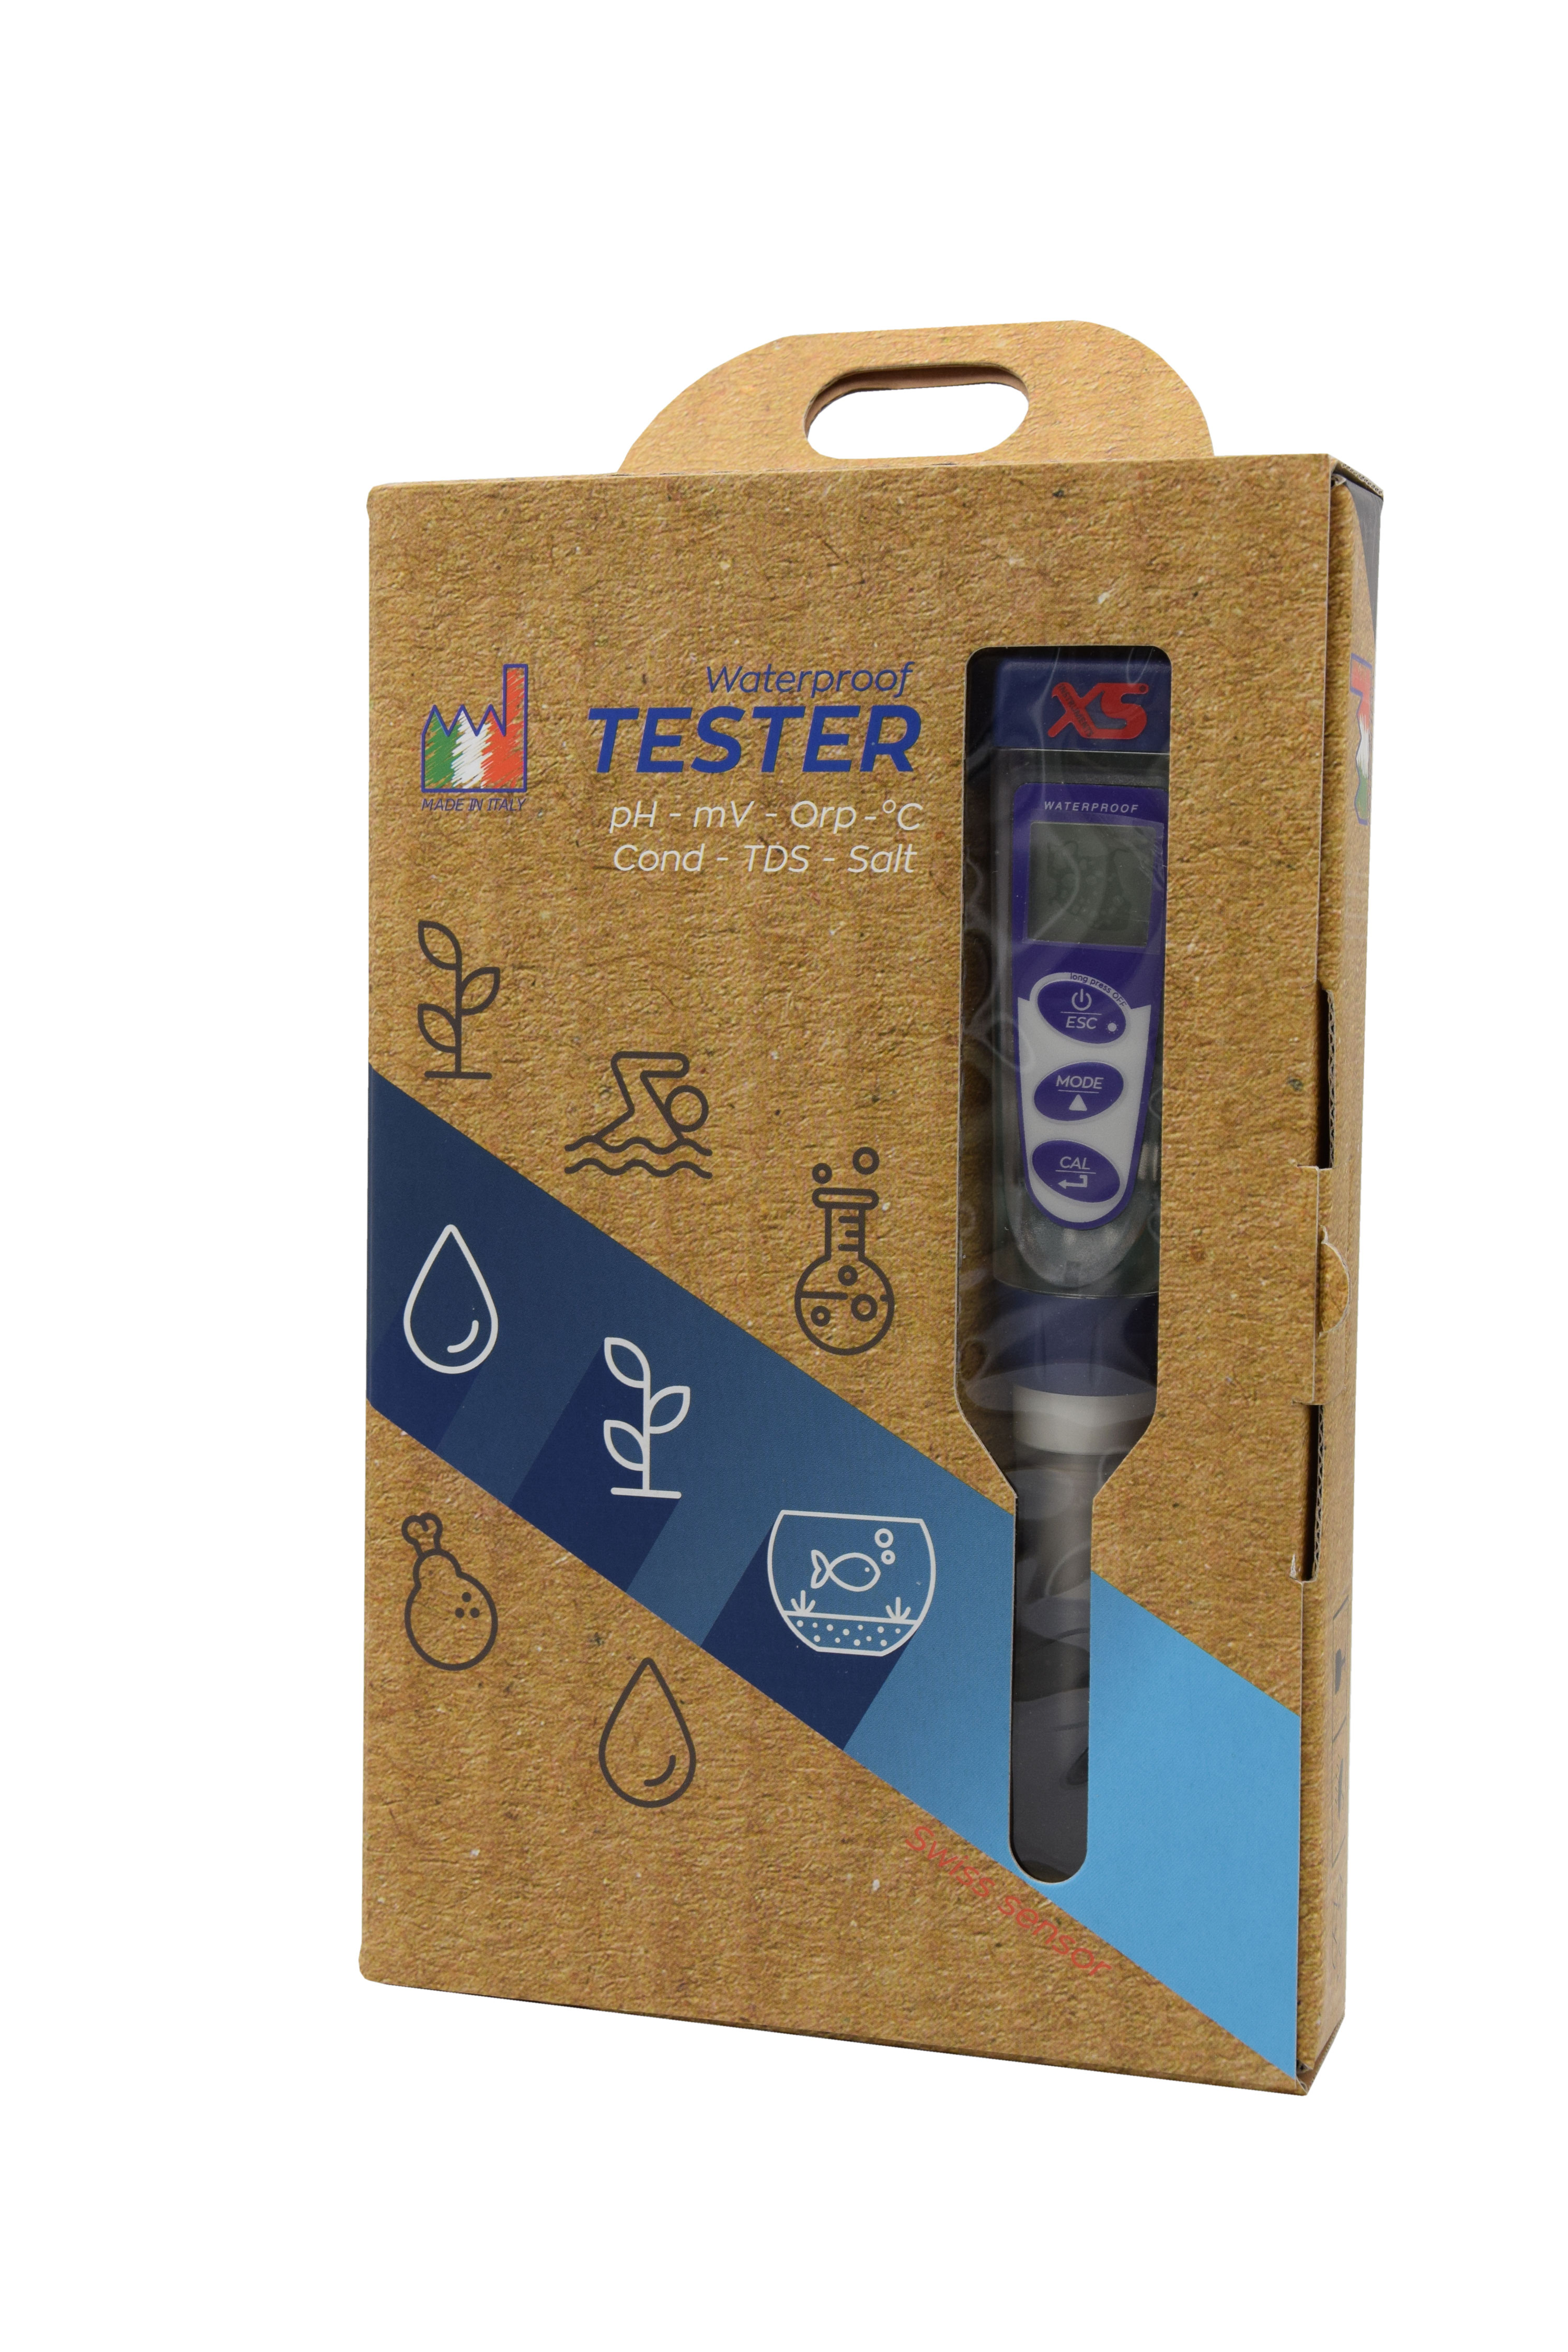 XS PC 6 Tester Kit -  Multiparameter Tester for determination of pH/mV/ORP/conductivity/TDS/salinity/temp. value